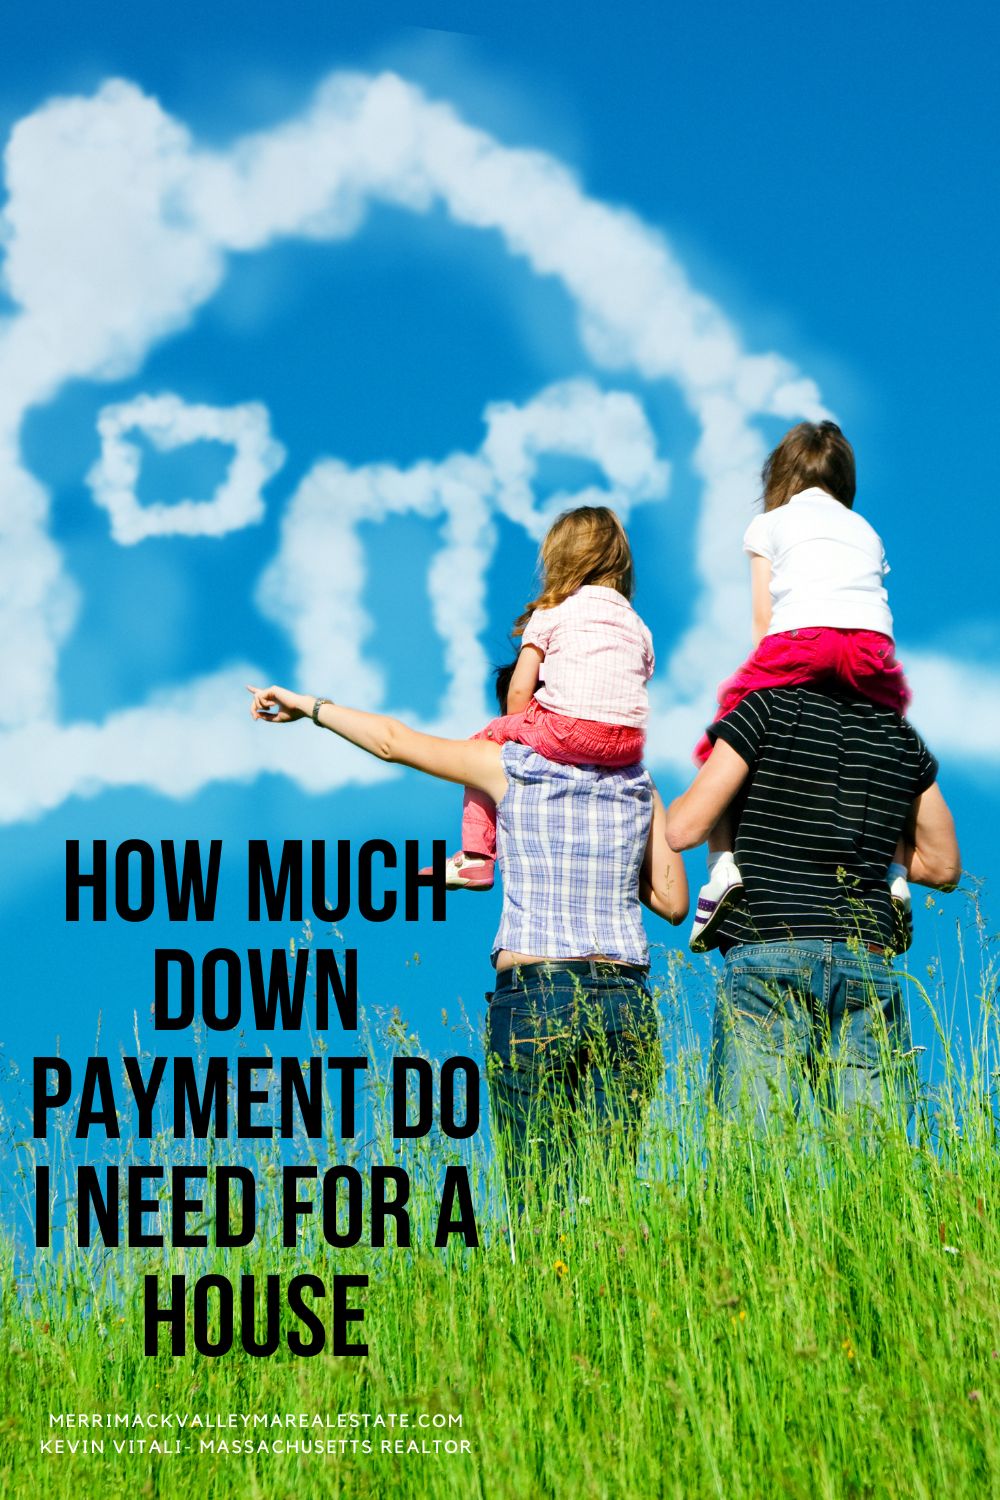 How much down payment do I need to buy a house